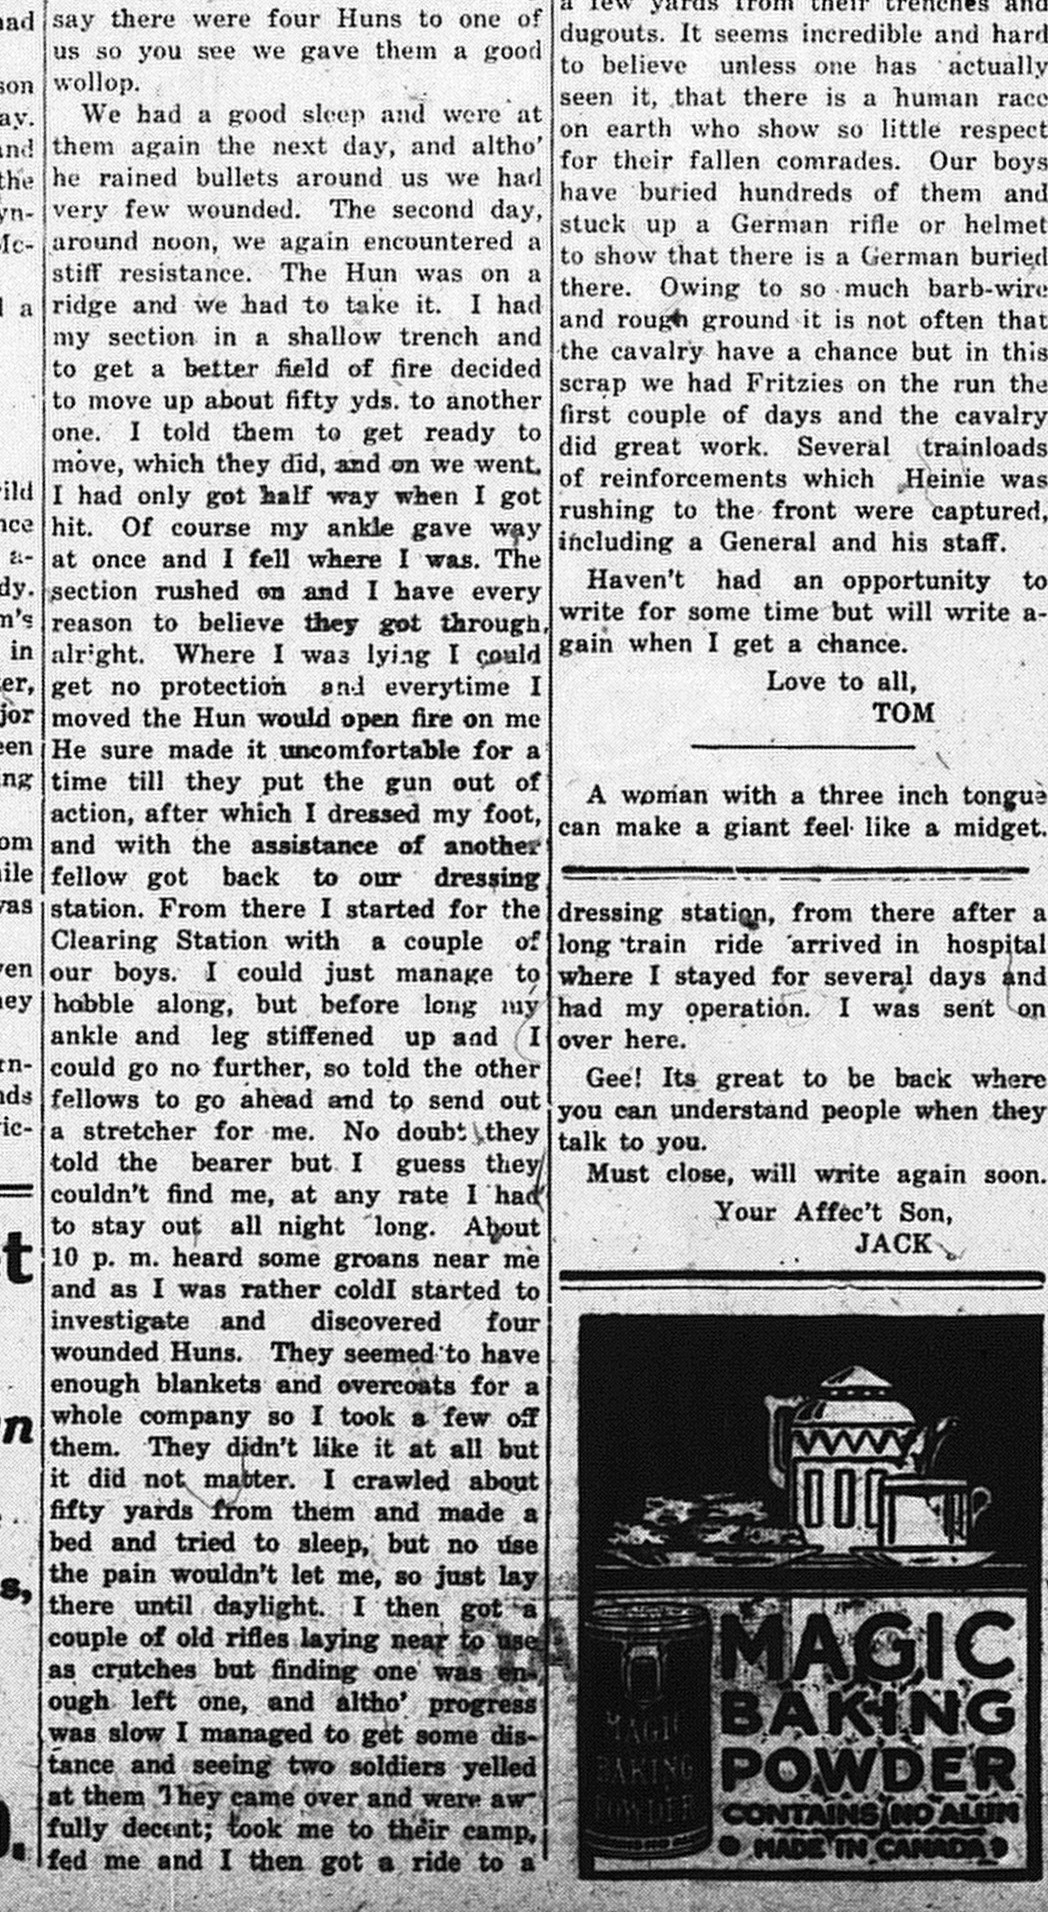 Canadian Echo, September 11, 1918 (part 2 of 2)